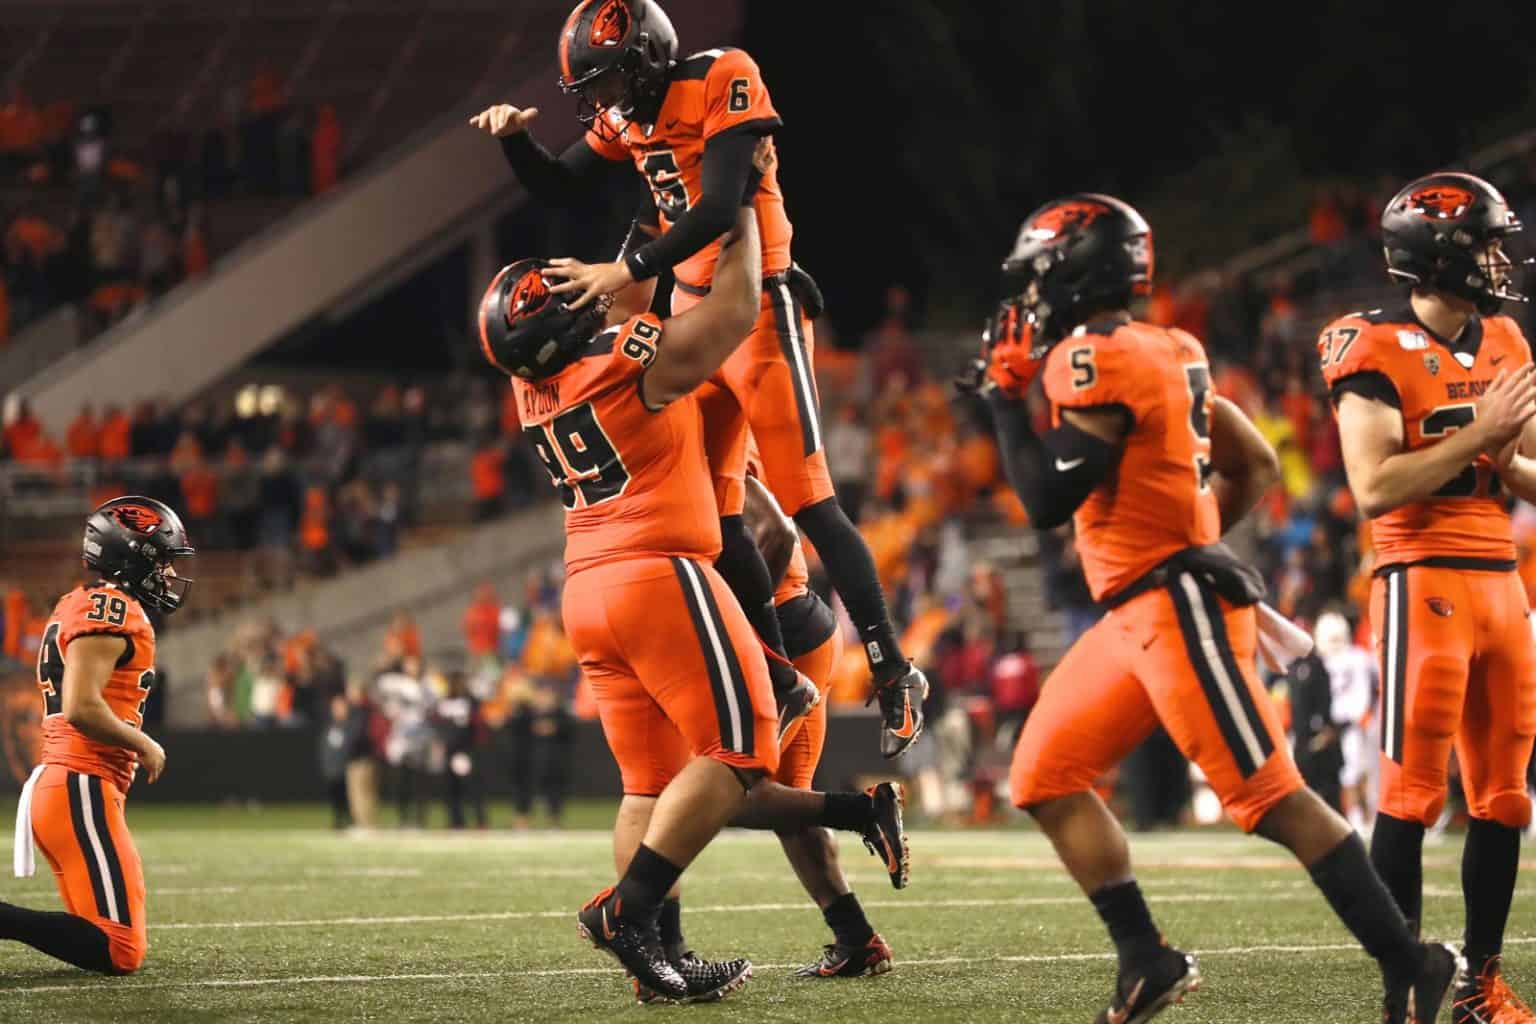 2020 Oregon State Beavers football schedule released